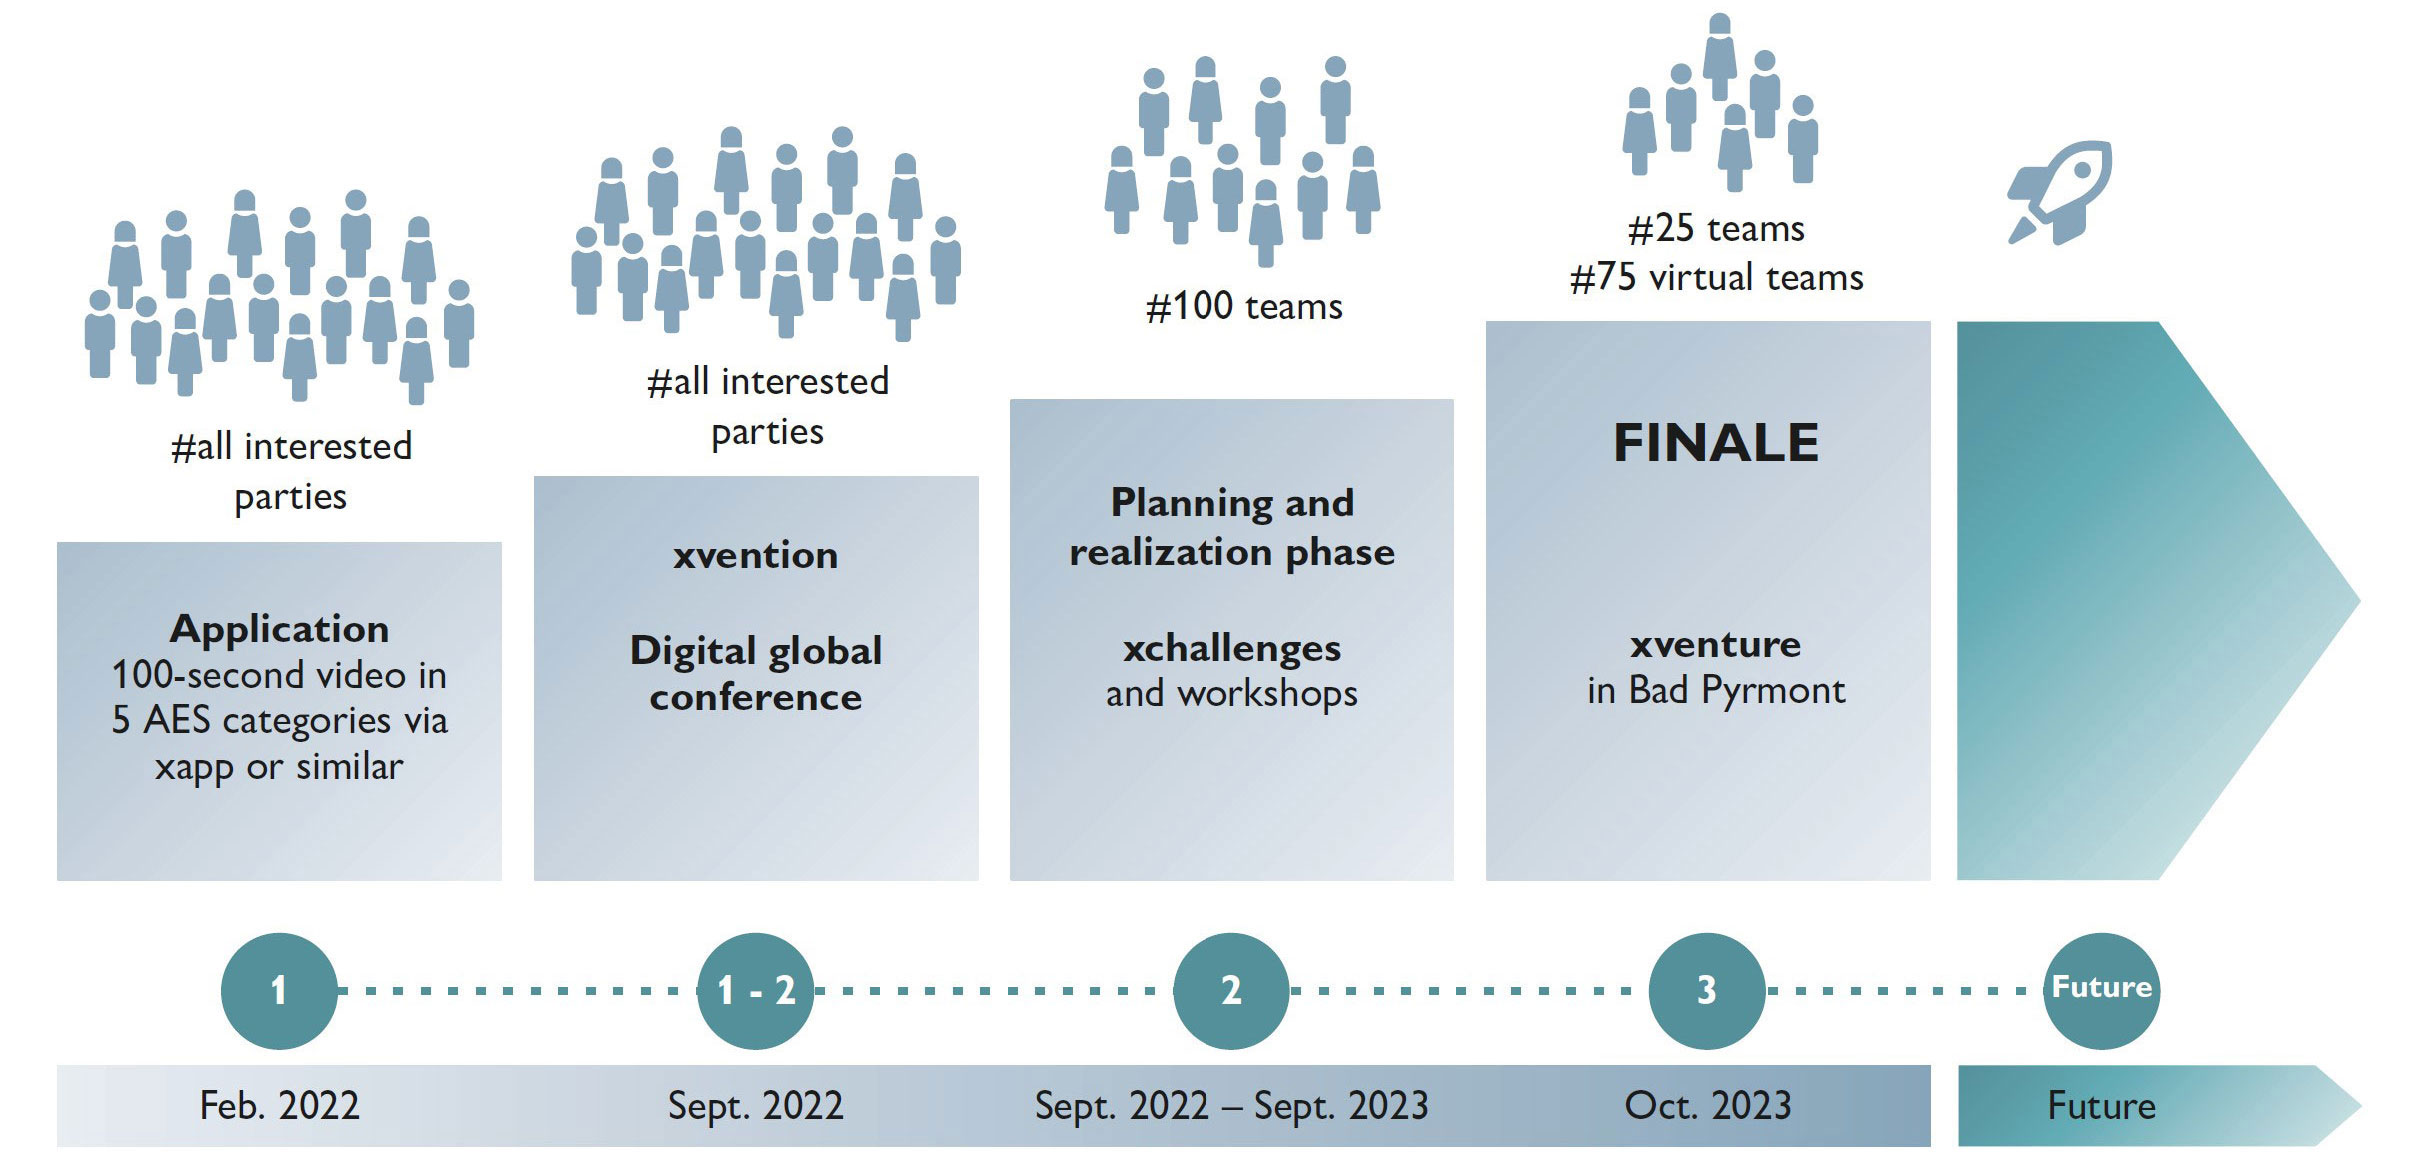 a timeline showing the different phases of the competition